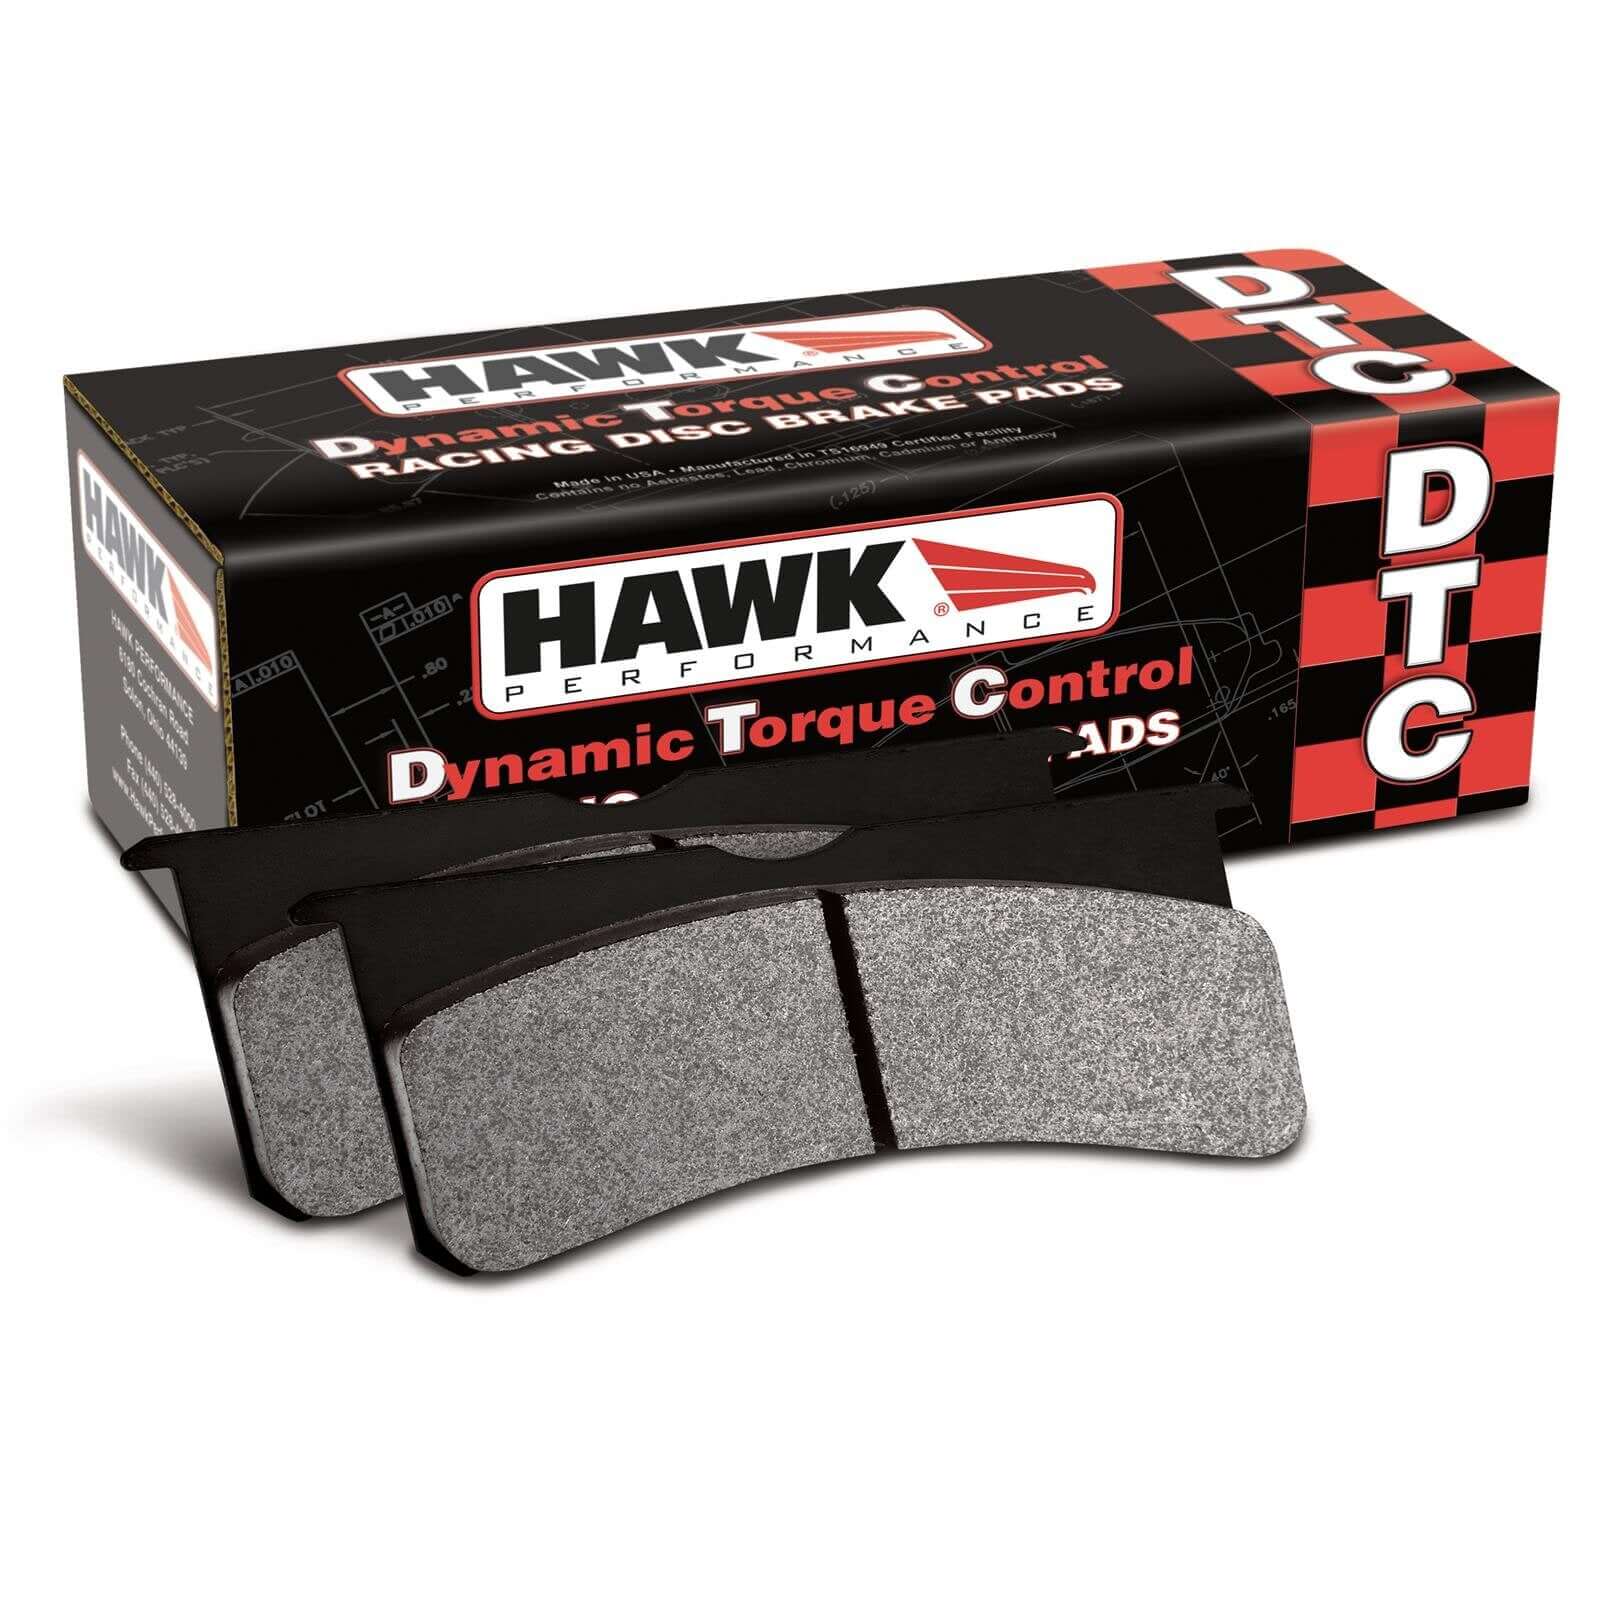 Spec E30: DTC 60 Brake Pads - Fronts (HB195G.640) - $199.89